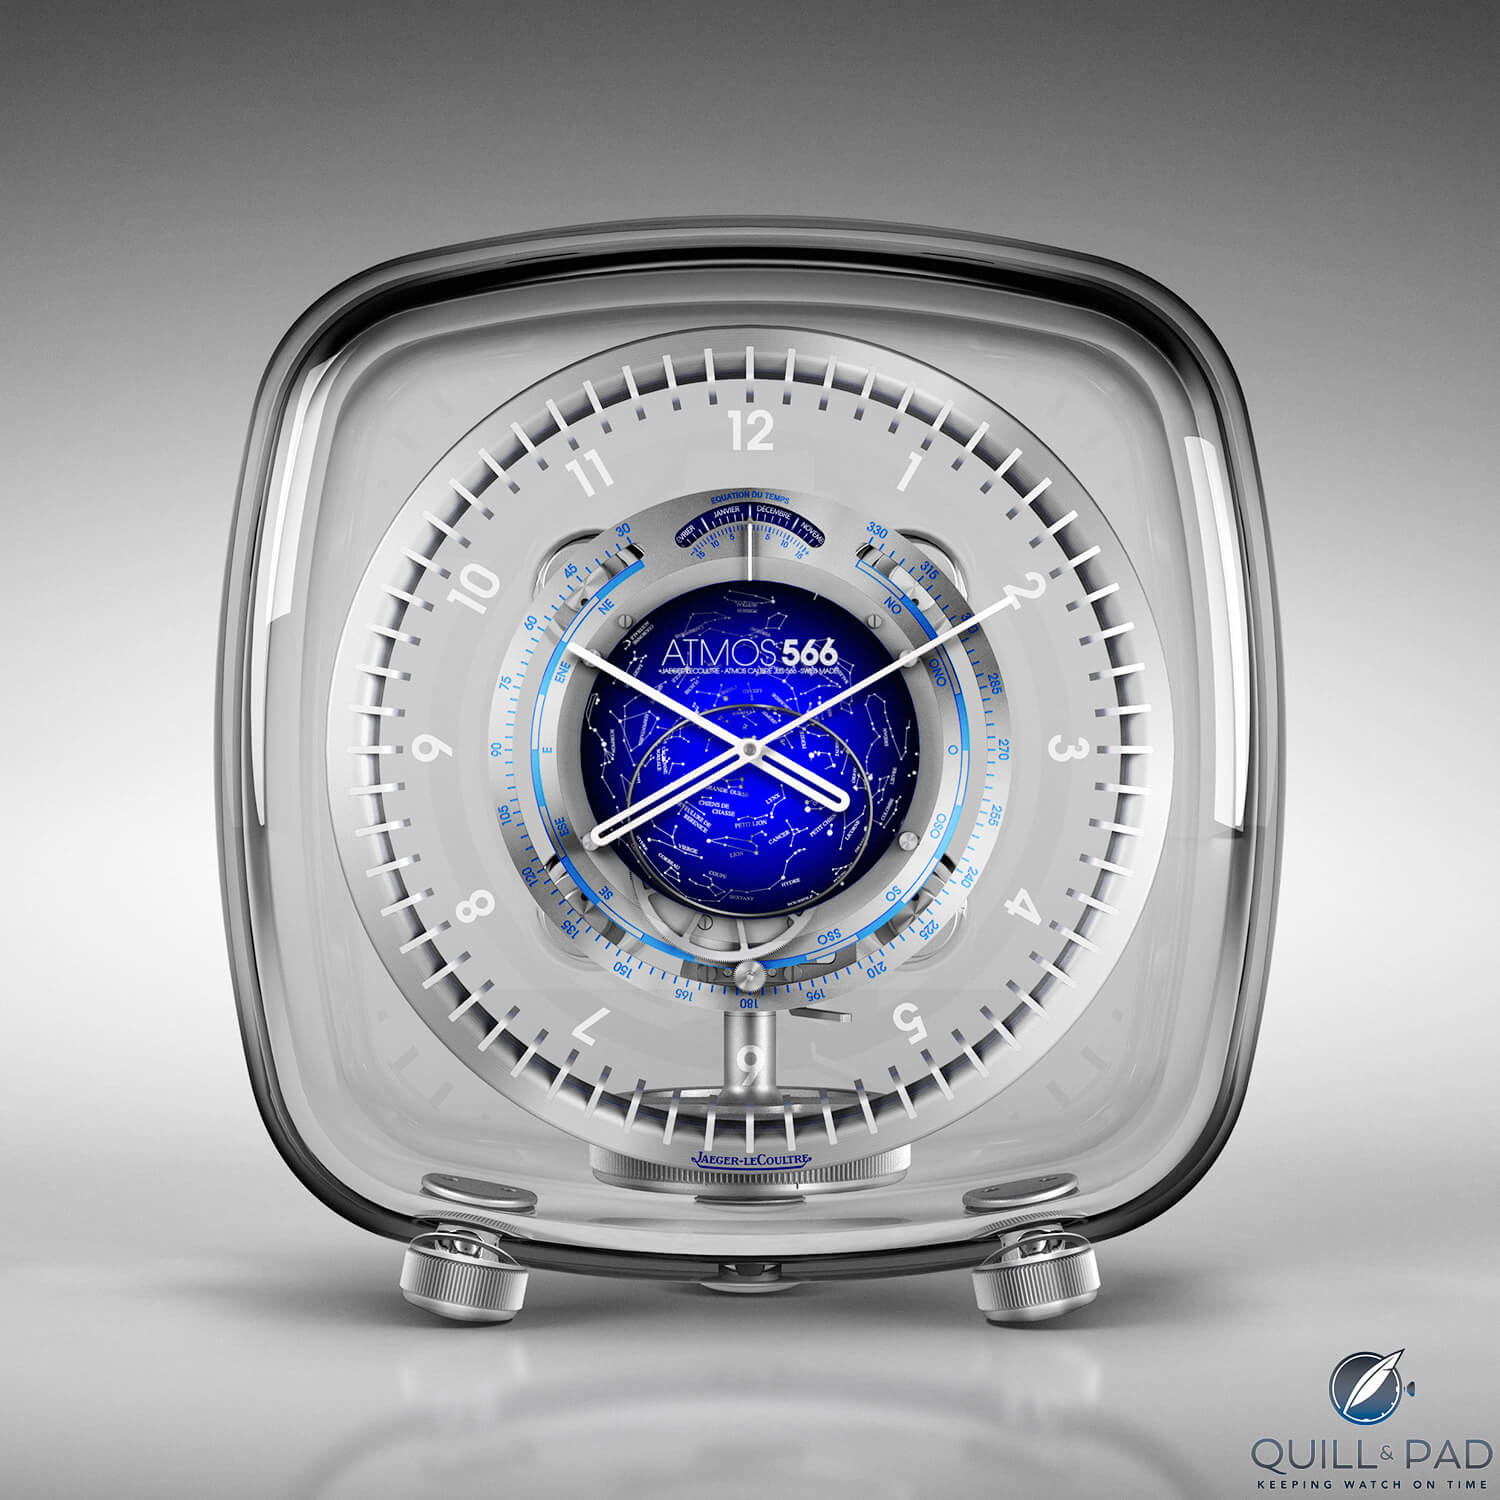 Light side of the Jaeger-LeCoultre Atmos 566 by Marc Newson from 2010